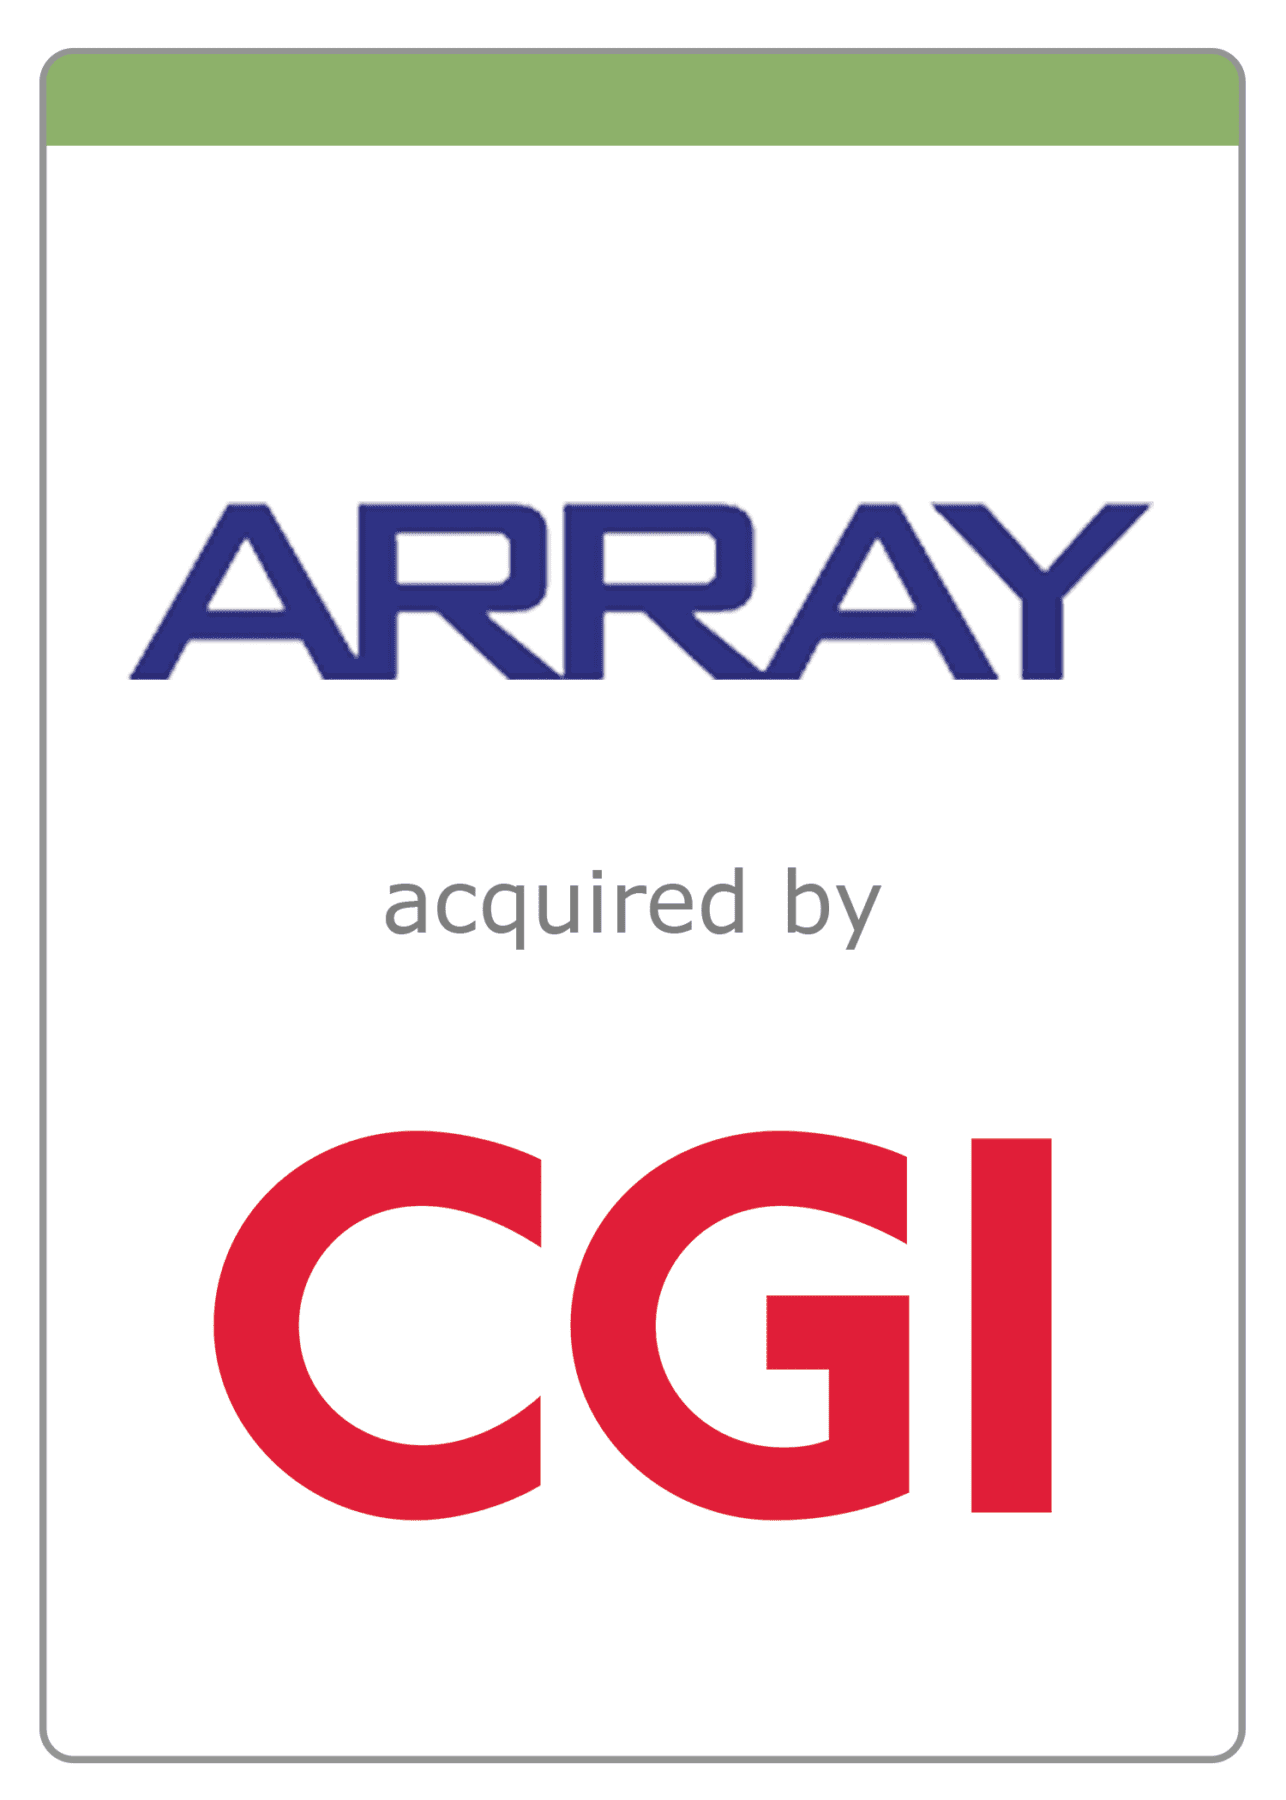 CGI Acquires ARRAY Information Technology, Inc.